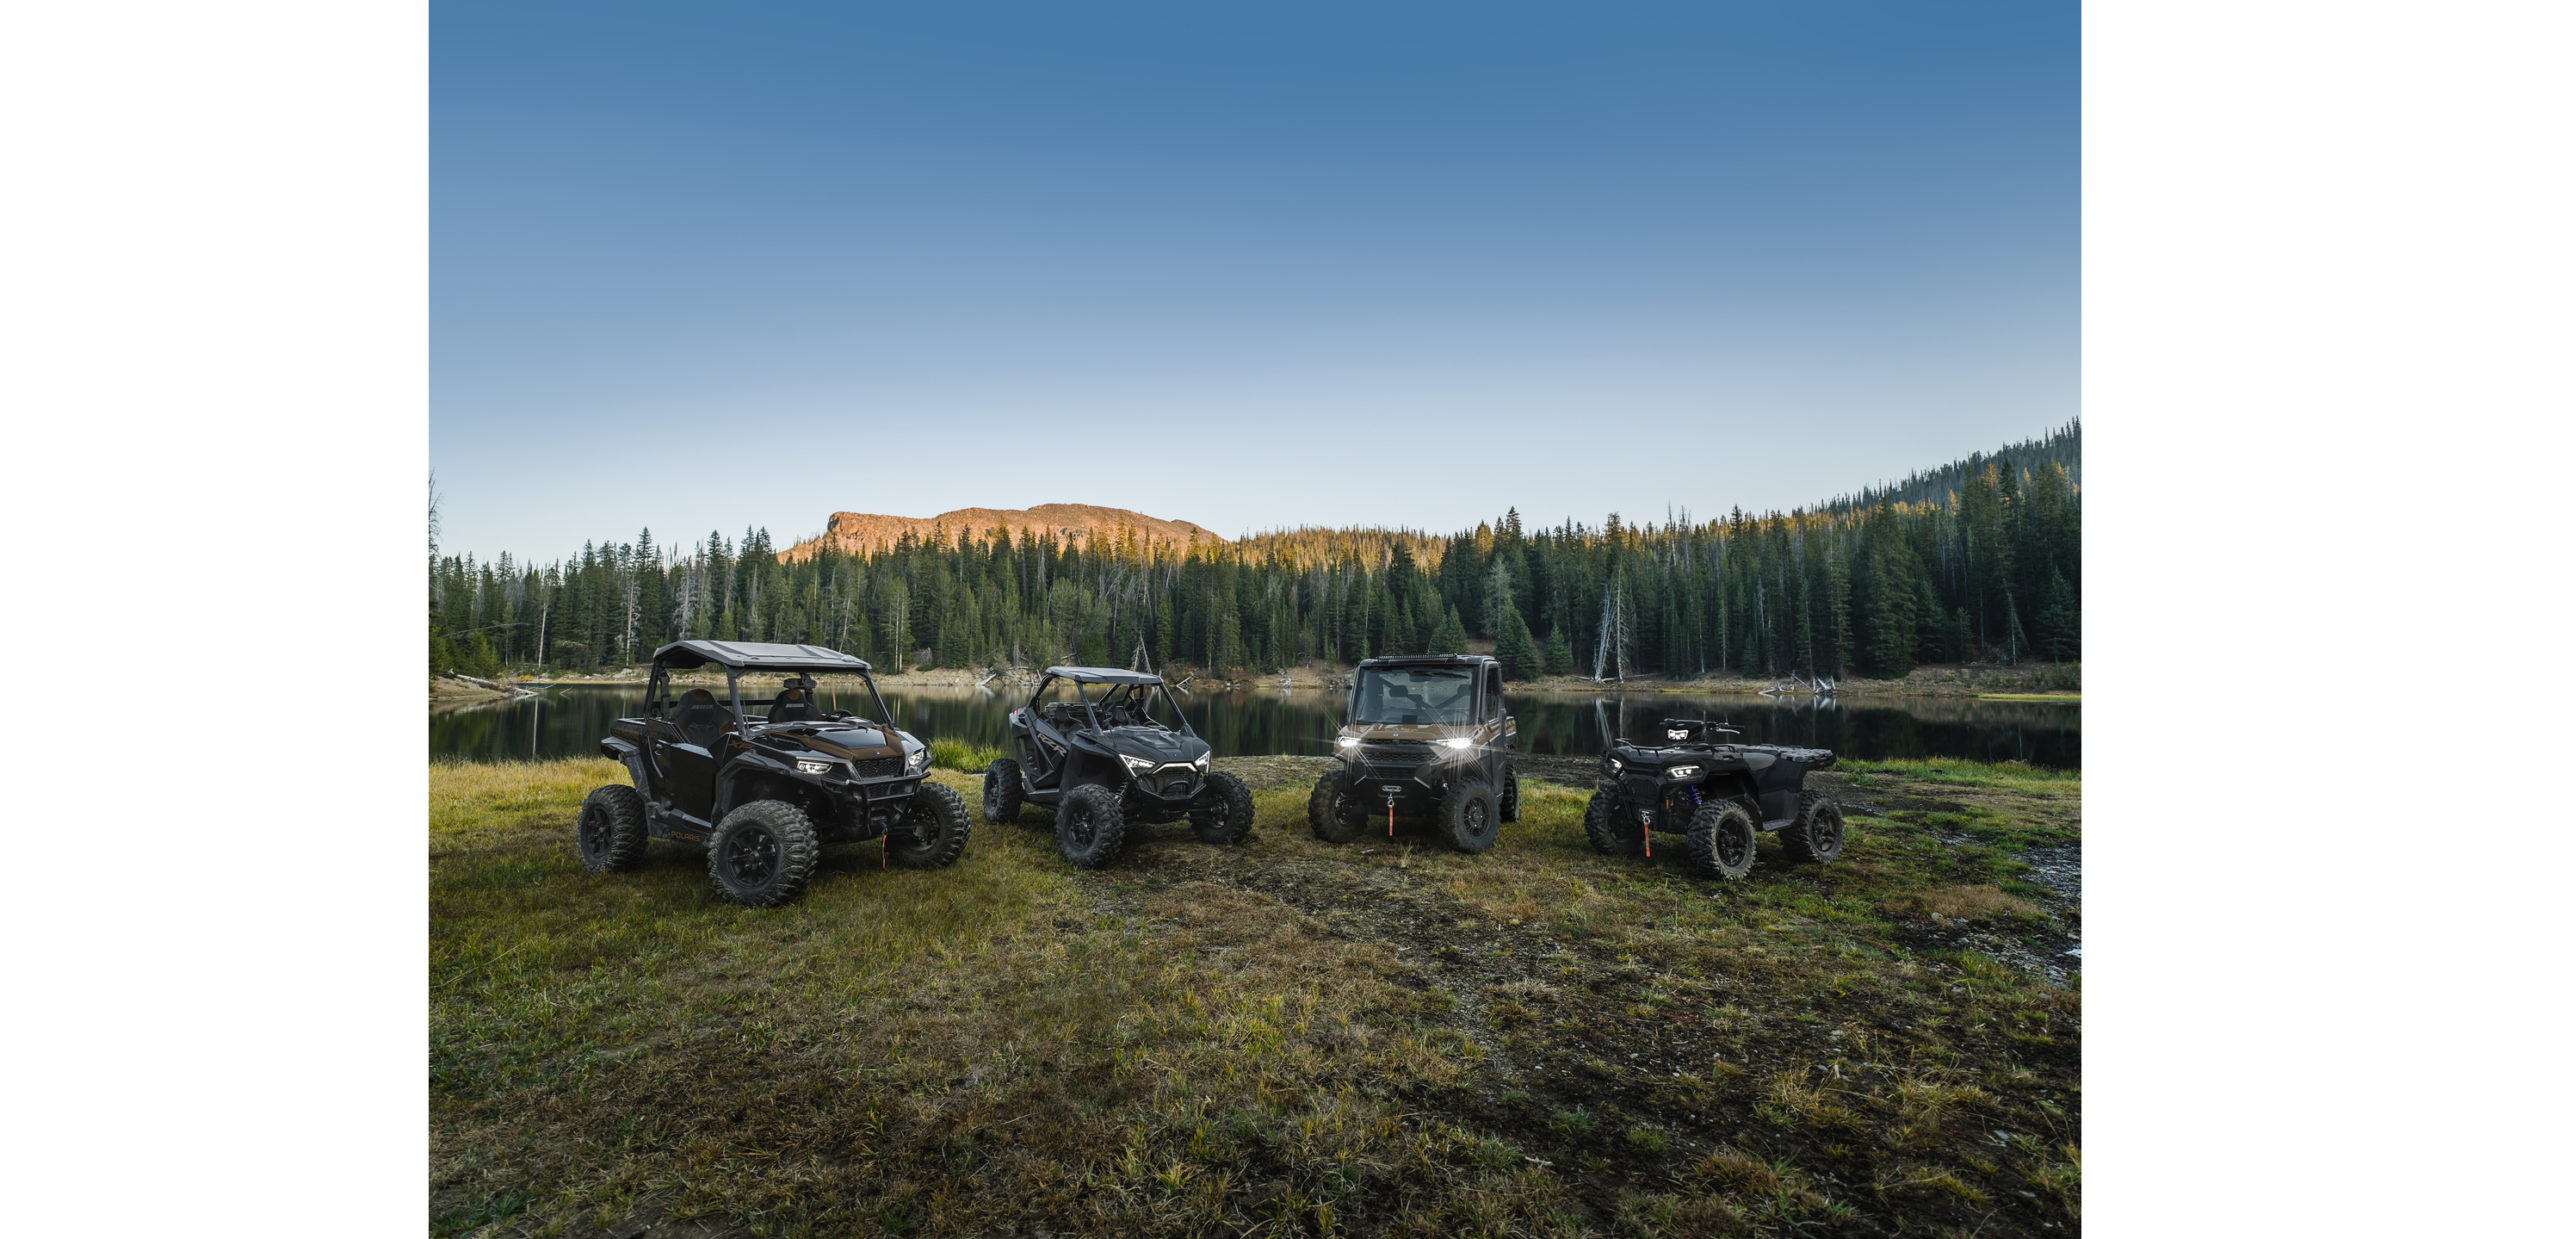 Polaris unveils 2023 ATV, side-by-side model lineup